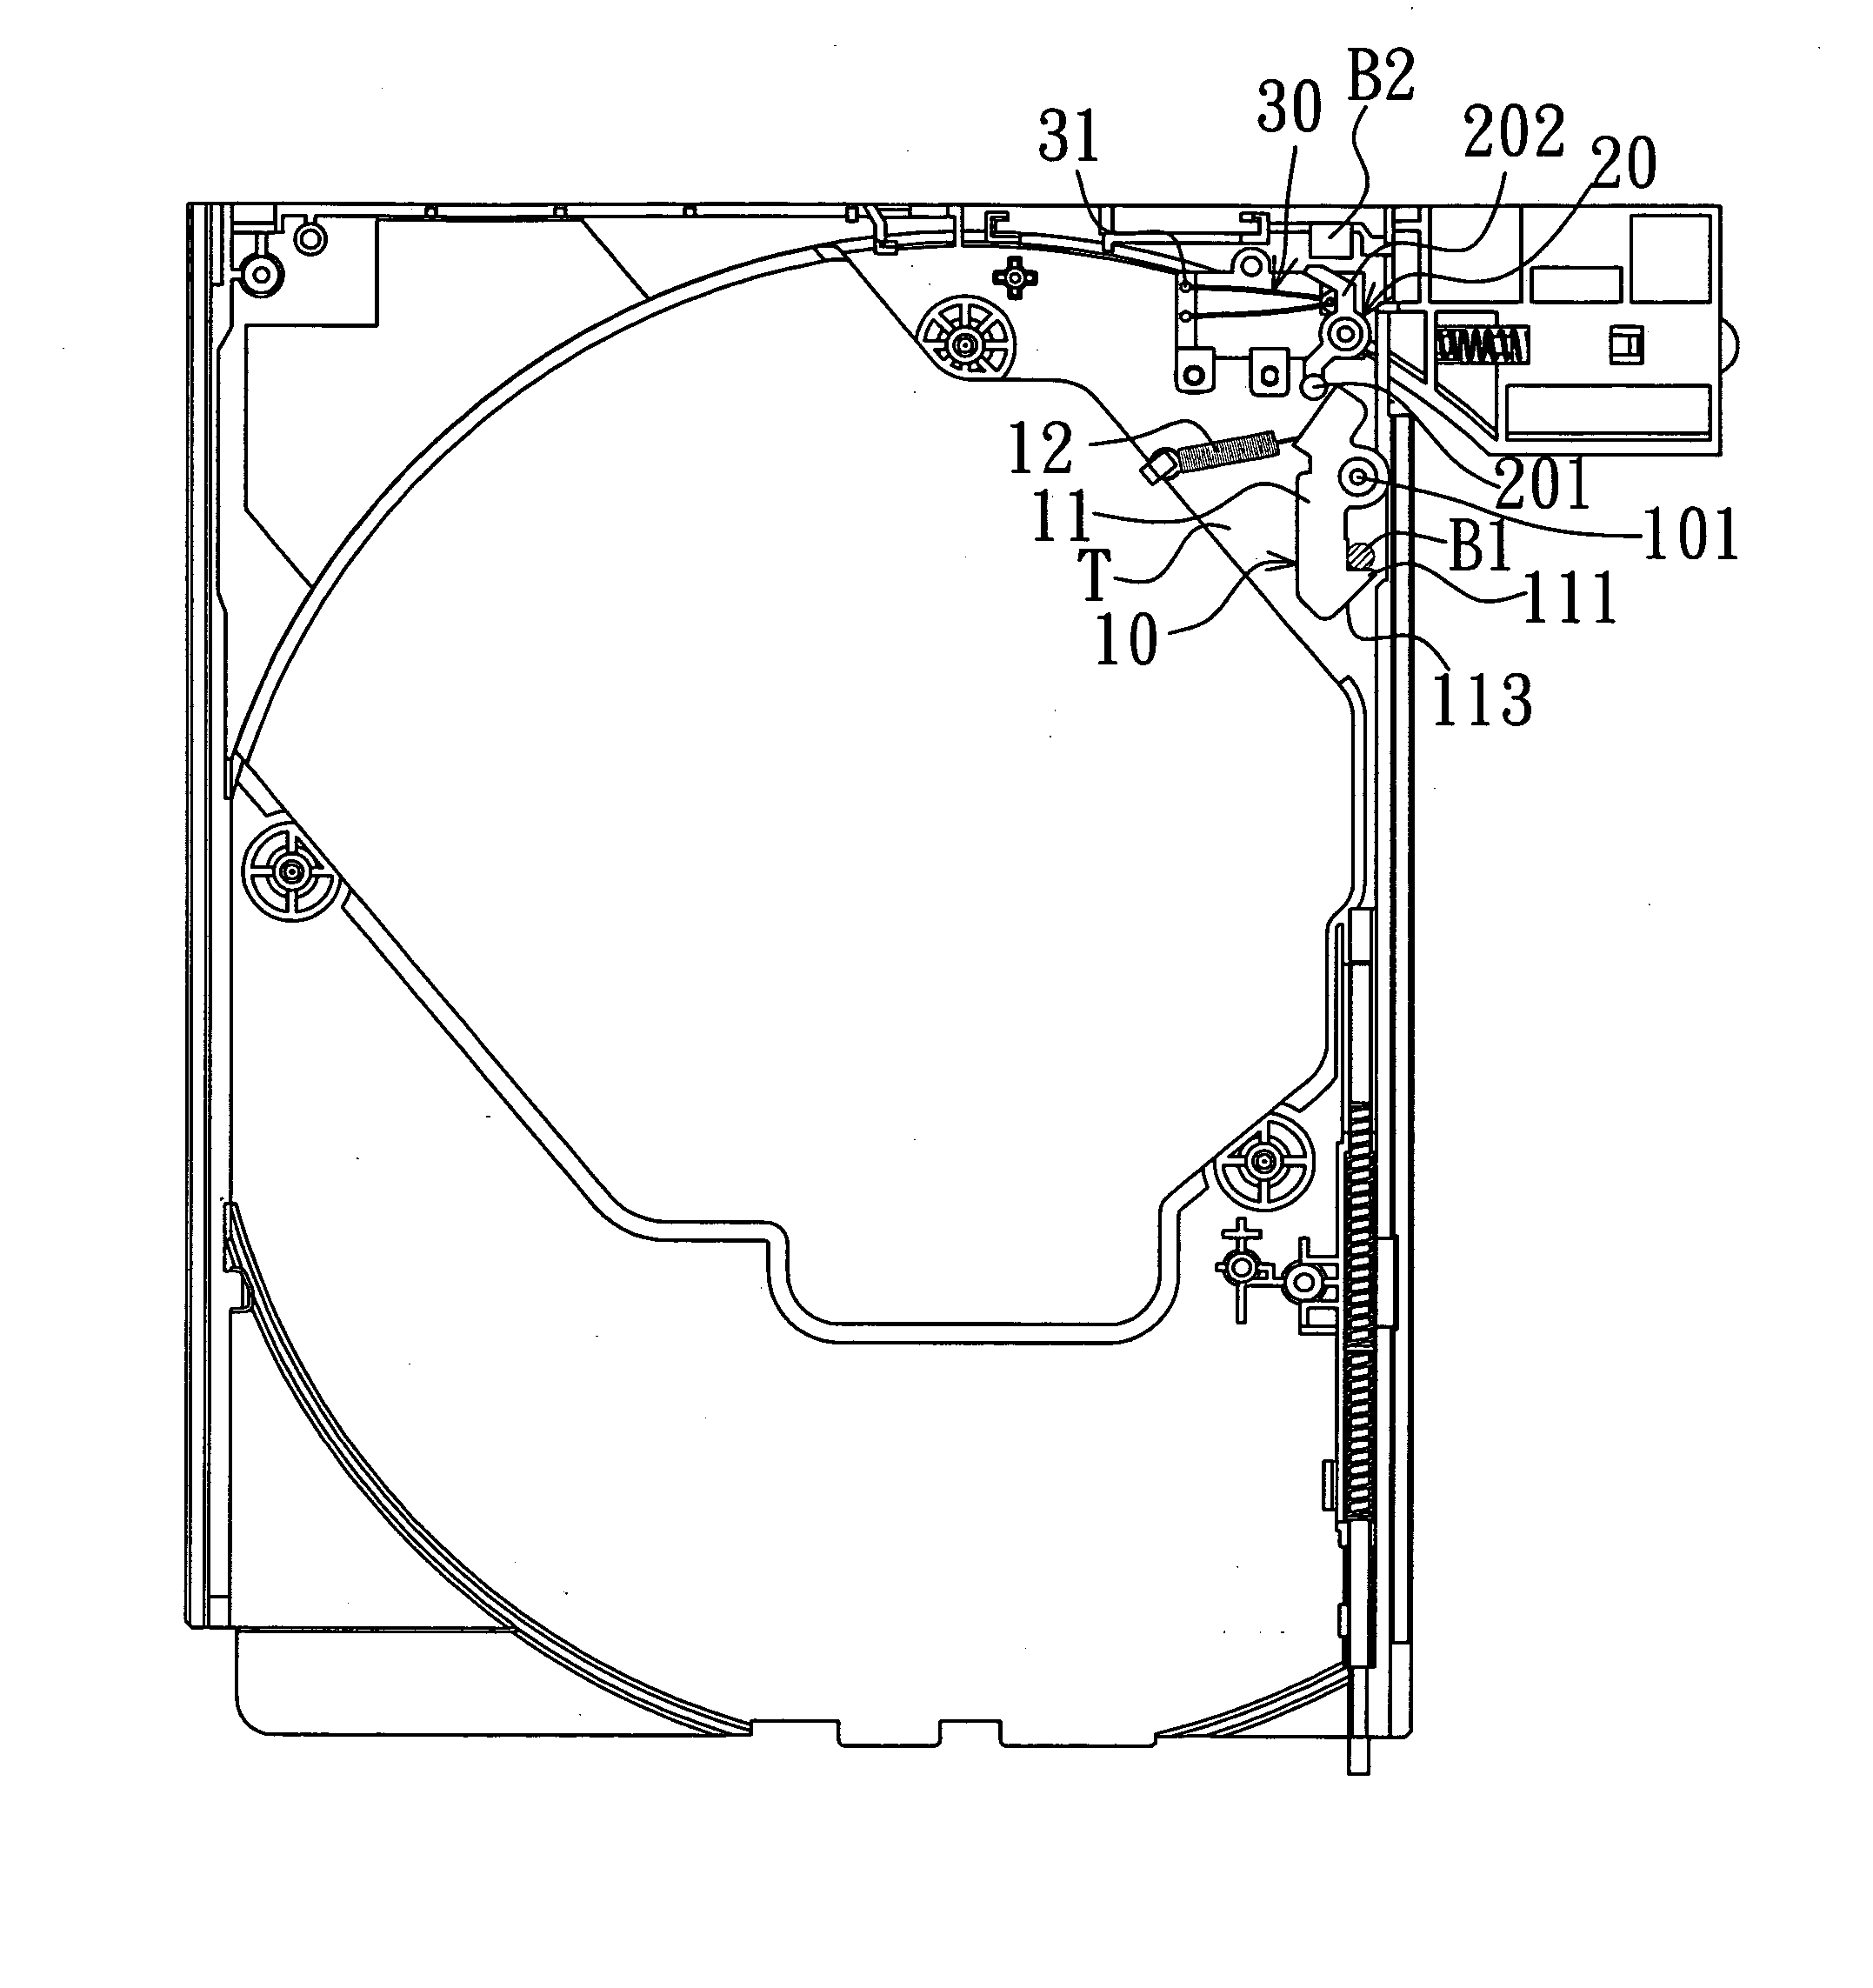 Tray locking device for optical disc drive